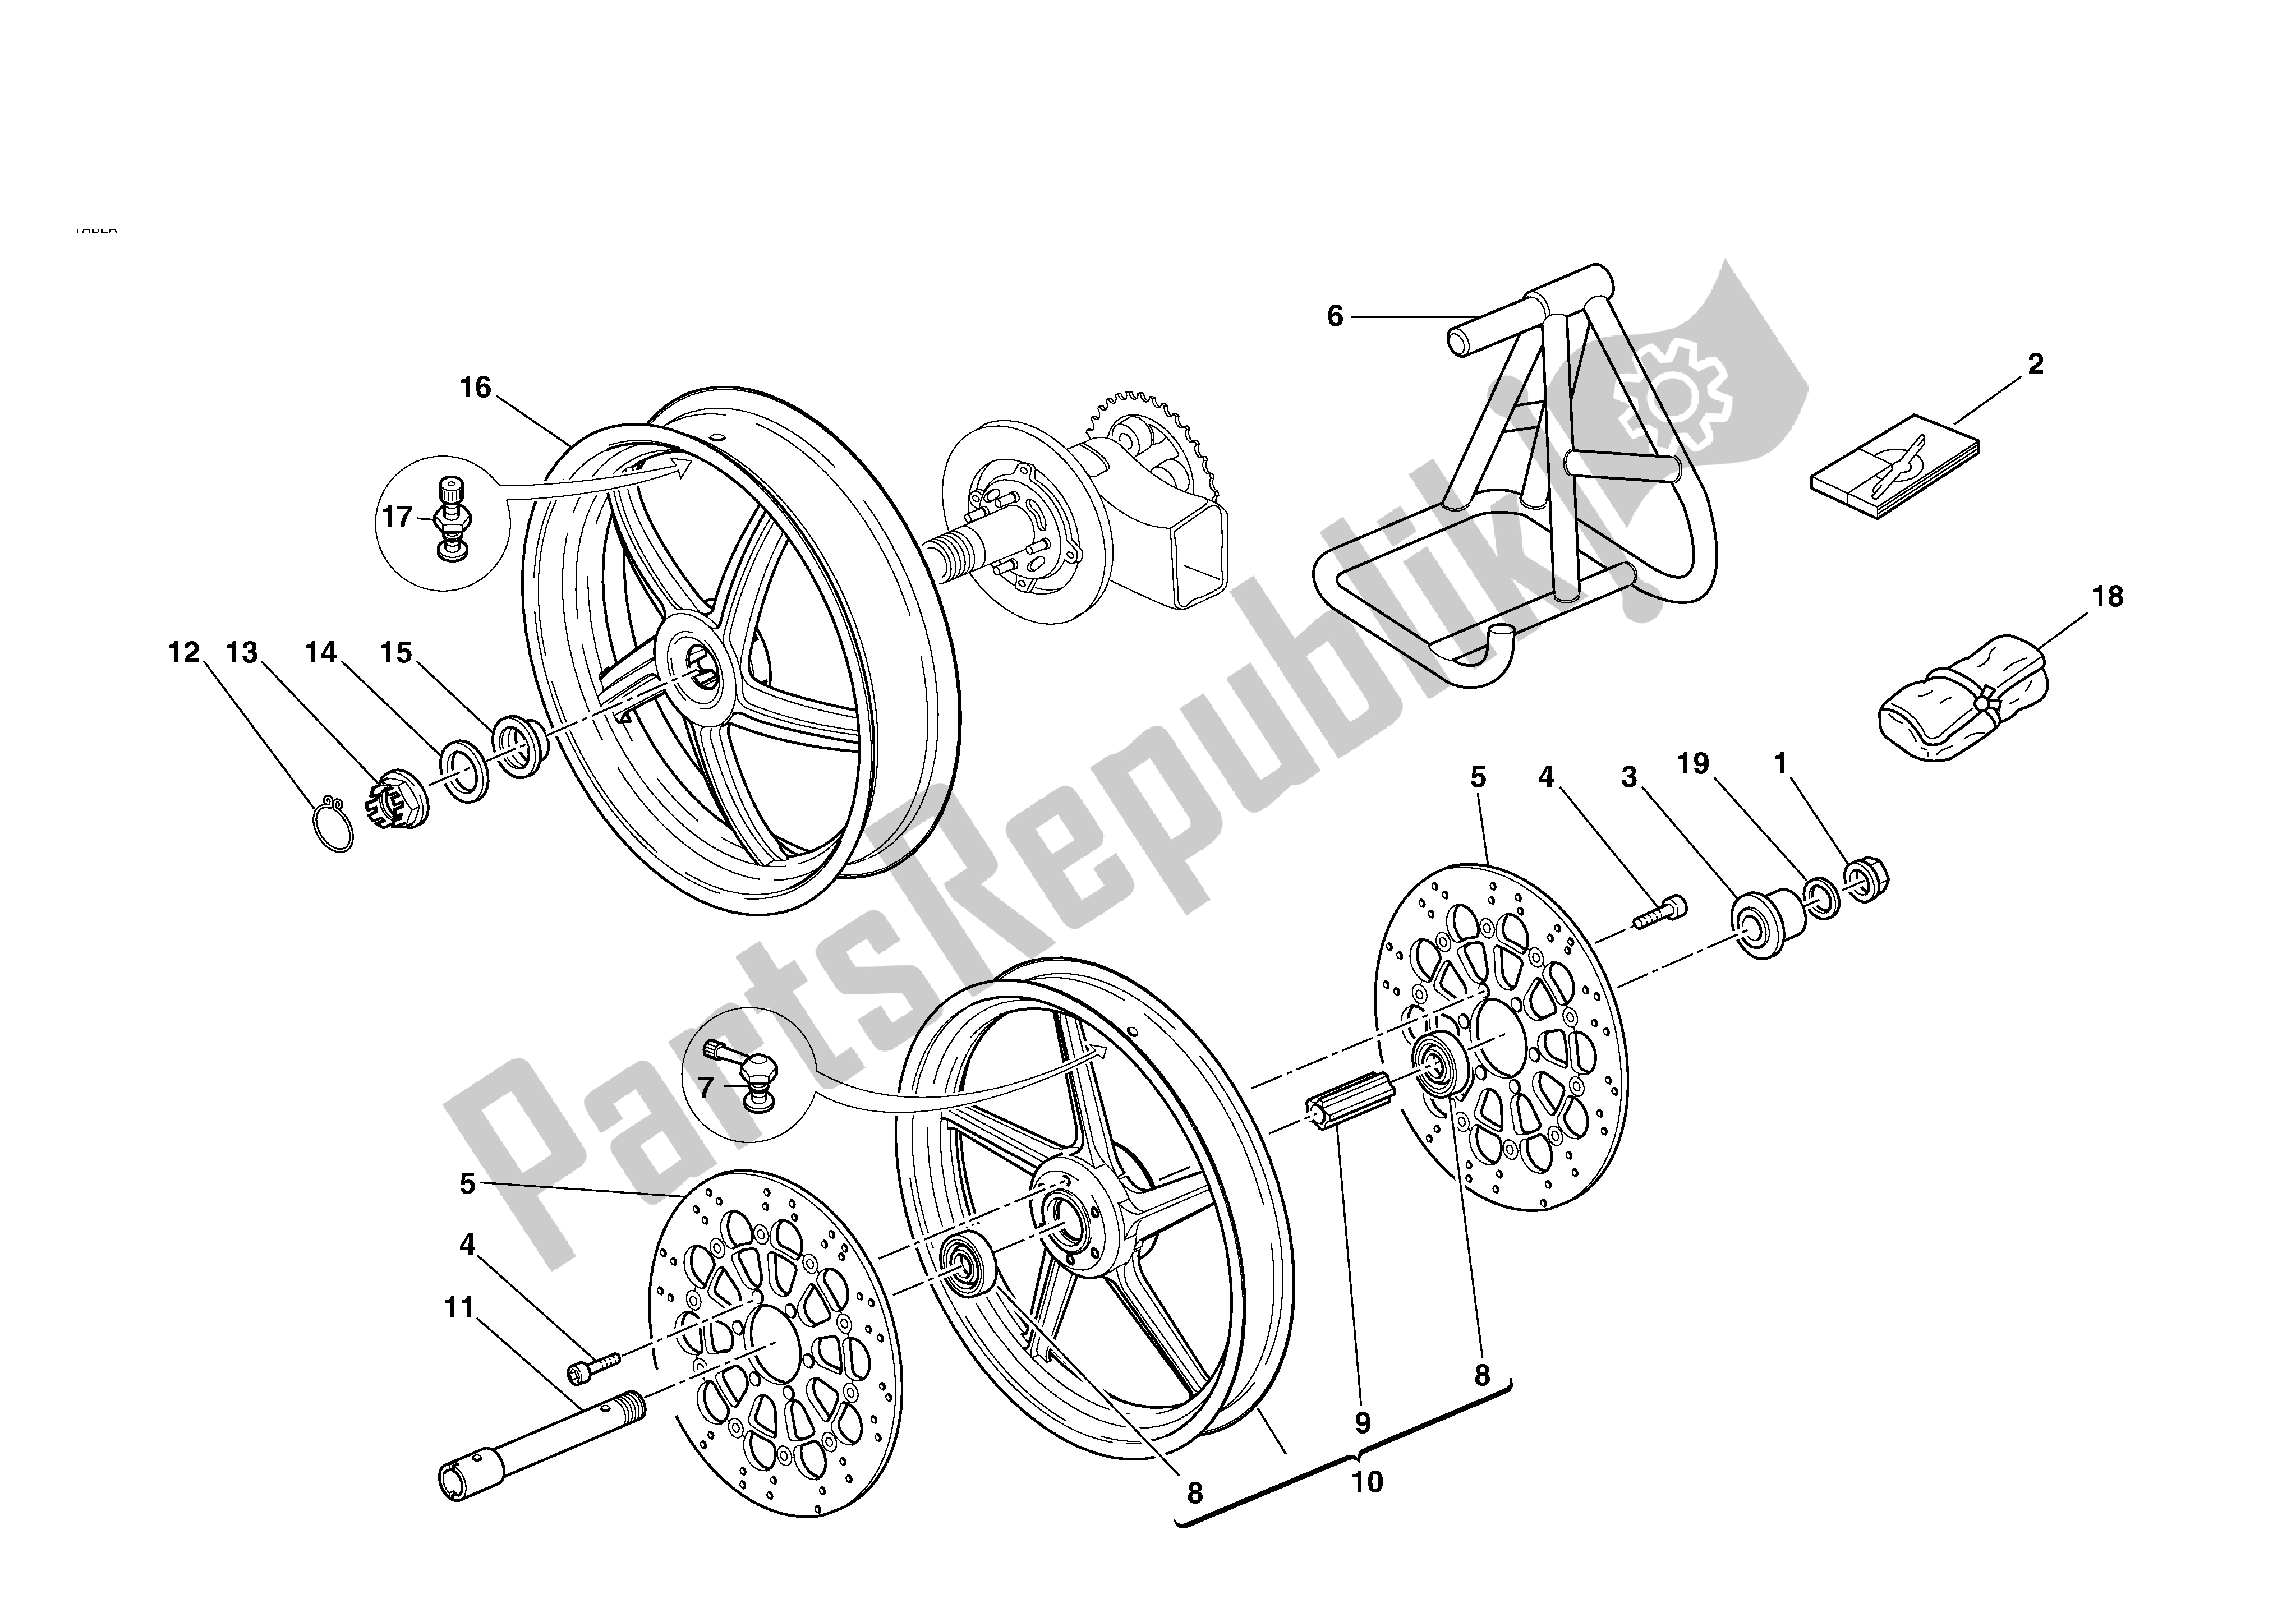 All parts for the Wheels of the Ducati MH 900 2001 - 2002